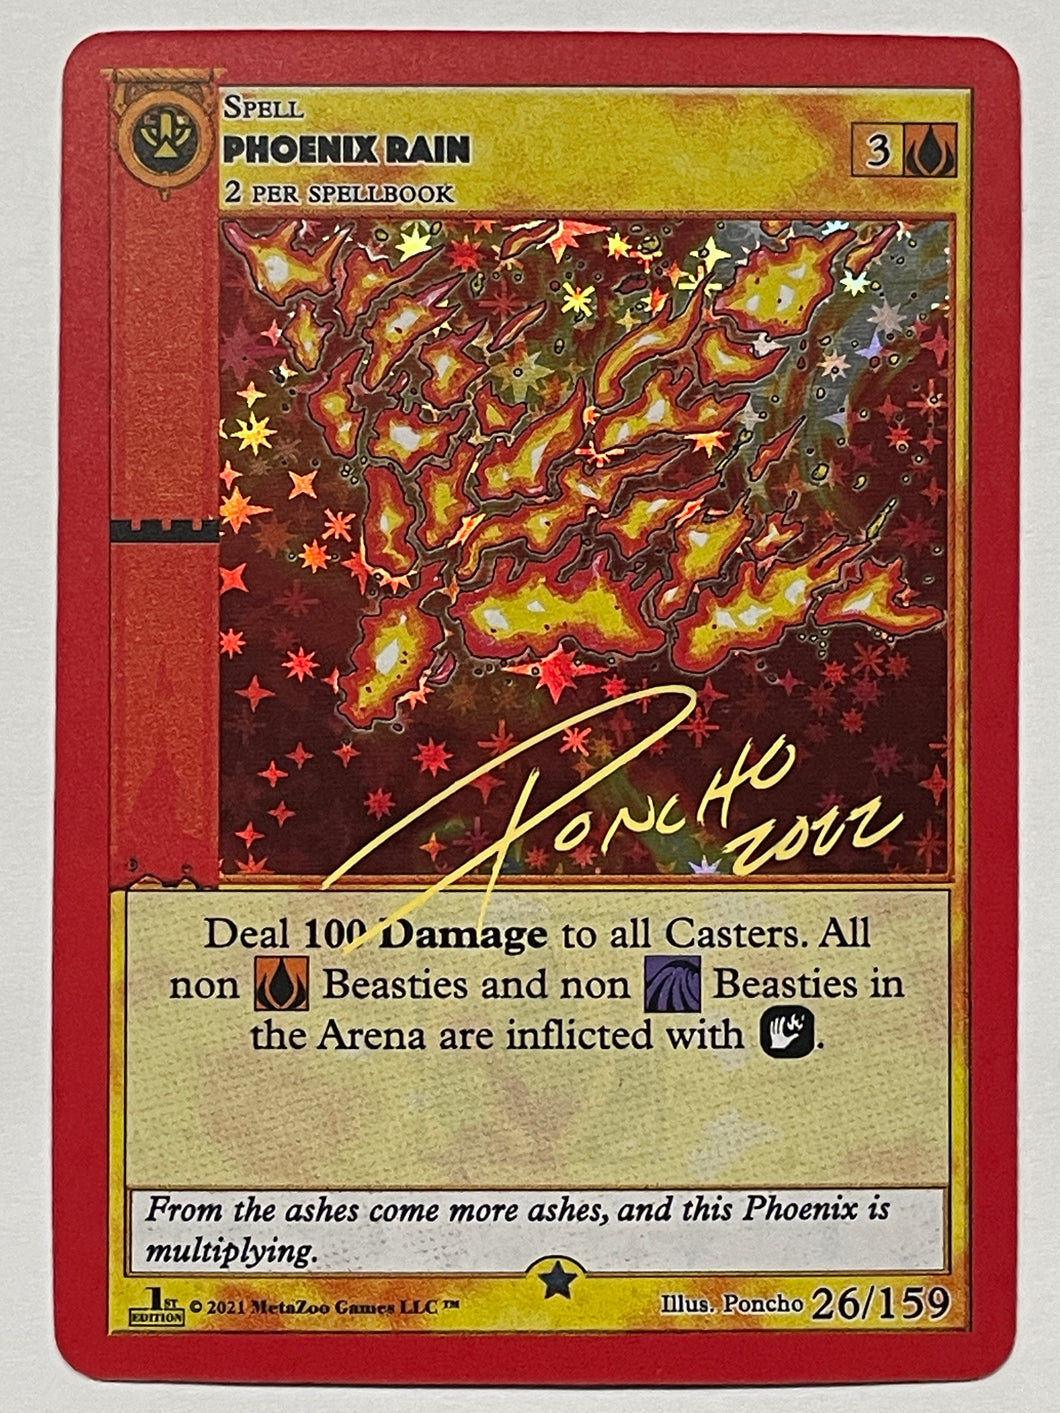 PHOENIX RAIN (PONCHO SIGNED) (HOLO) METAZOO CRYPTID NATION FIRST EDITION CNFE #26